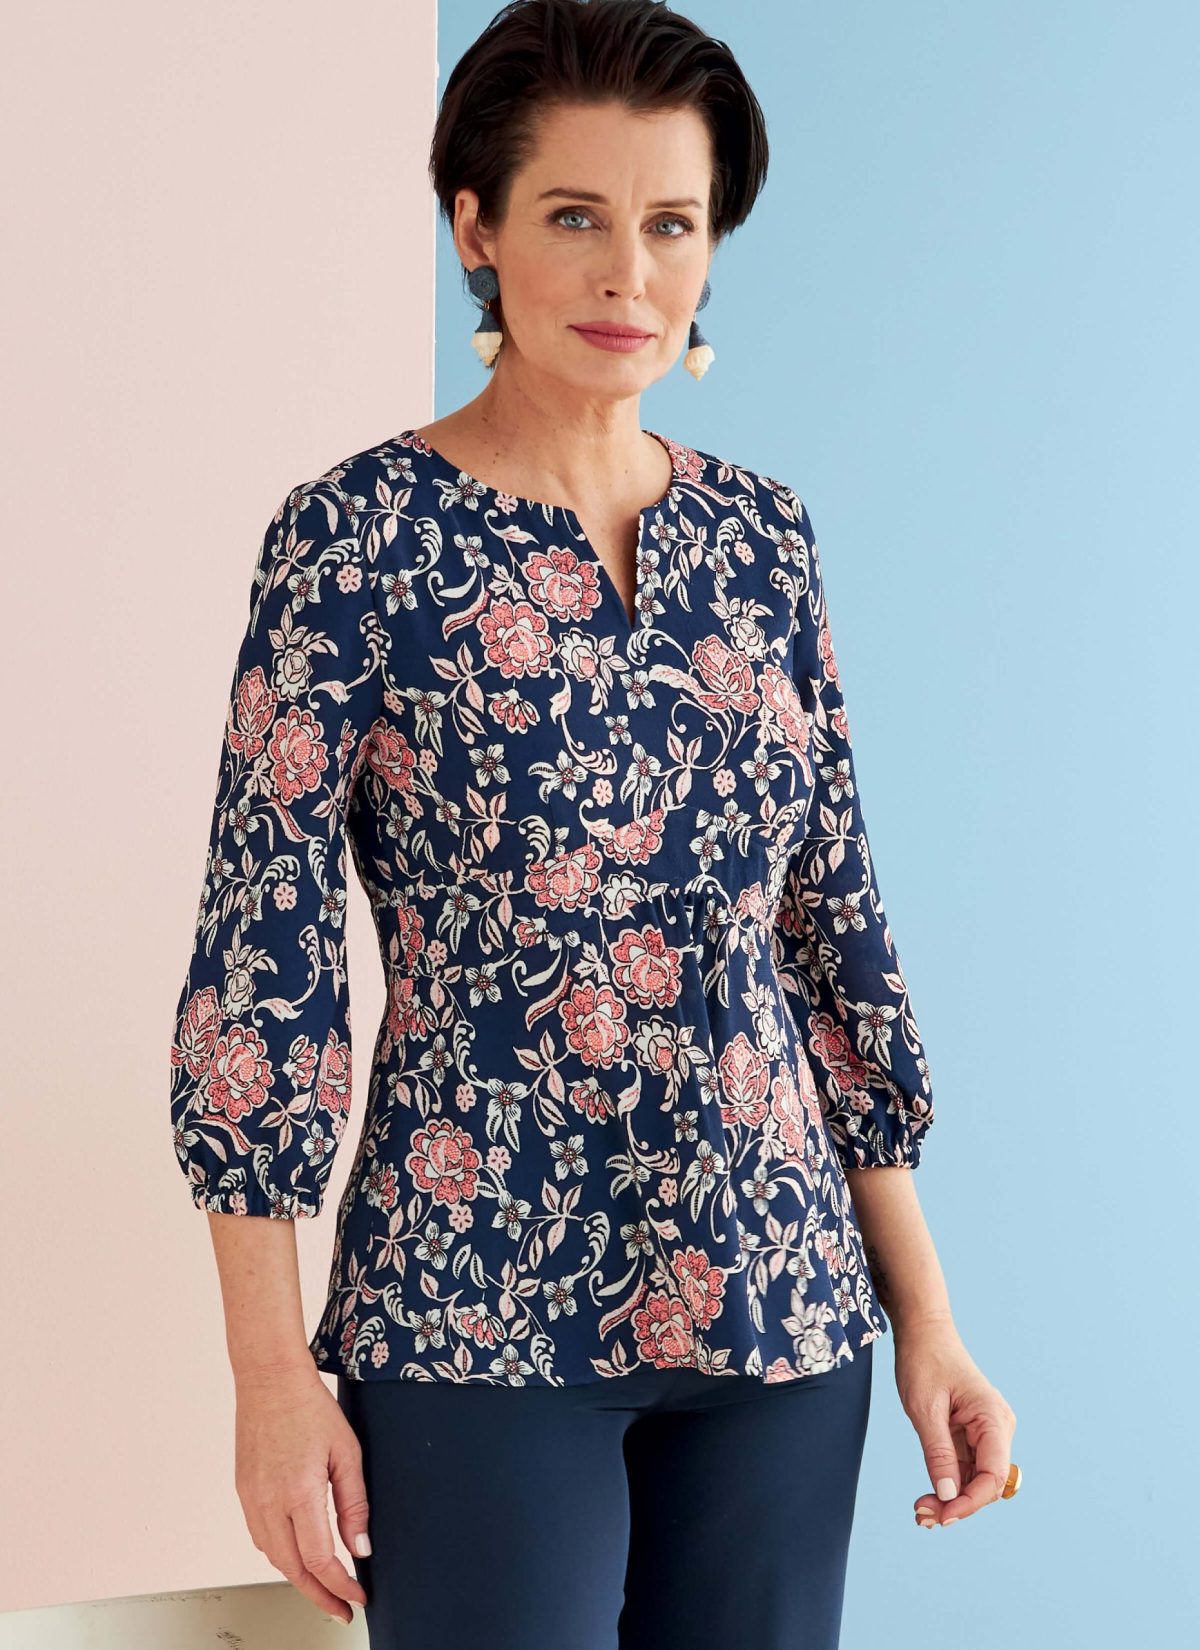 Butterick Sewing Pattern B6732 Misses' Top